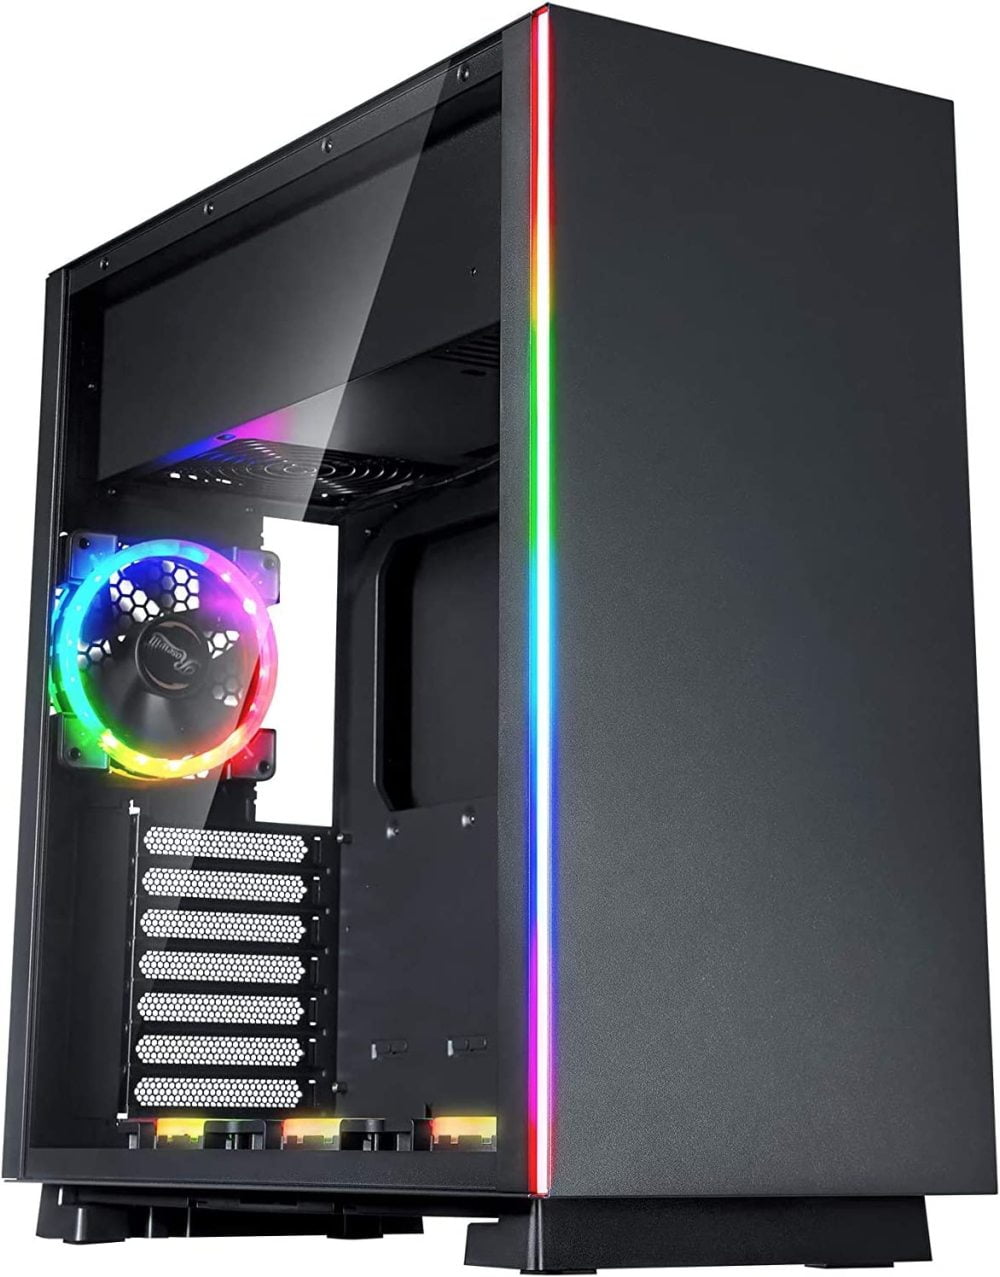 Rosewill ATX Mid Tower RGB Gaming Computer Case with Tempered Glass RGB PC Fans Excellent Cable Management and Airflow Support for AIO Water Cooling and Large Graphic CardsVGA - Prism S500 -